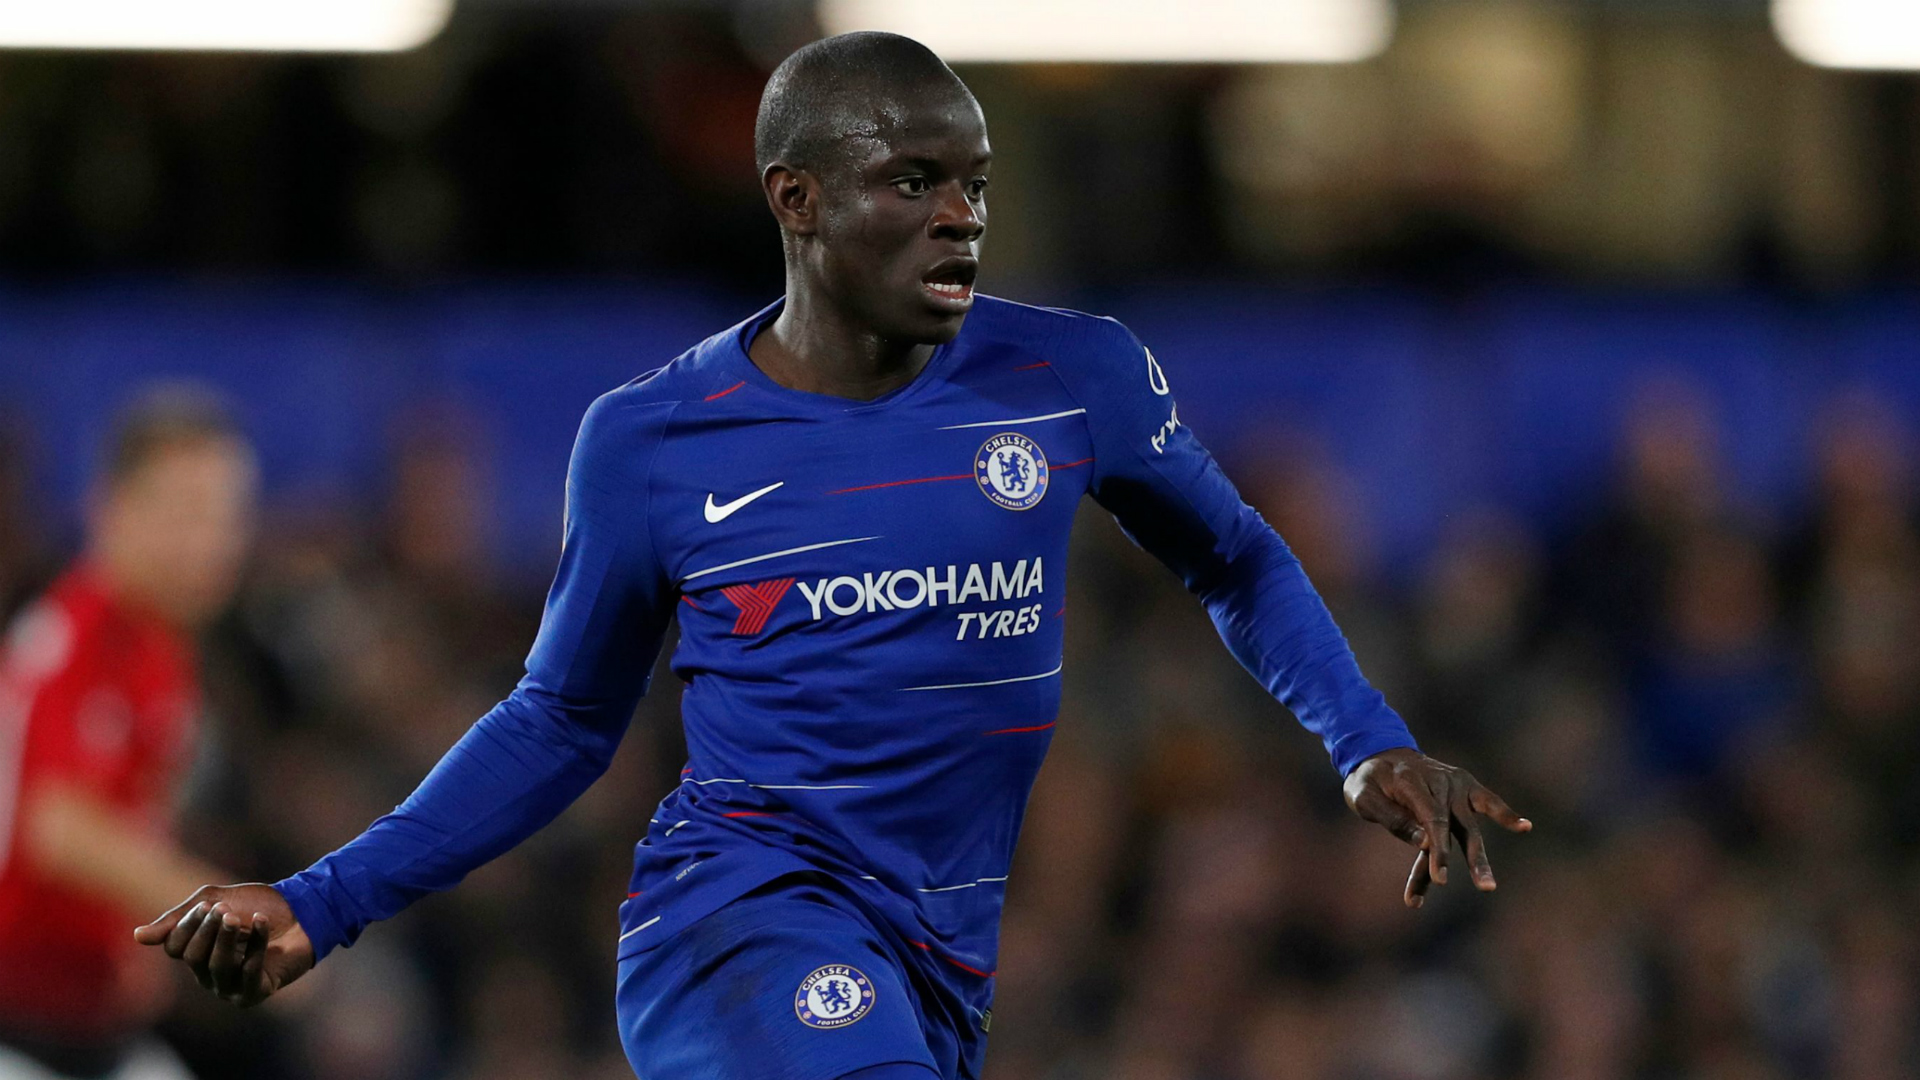 Image result for Sarri on Kante position: I need a player to move the ball fast - he's not the best at it